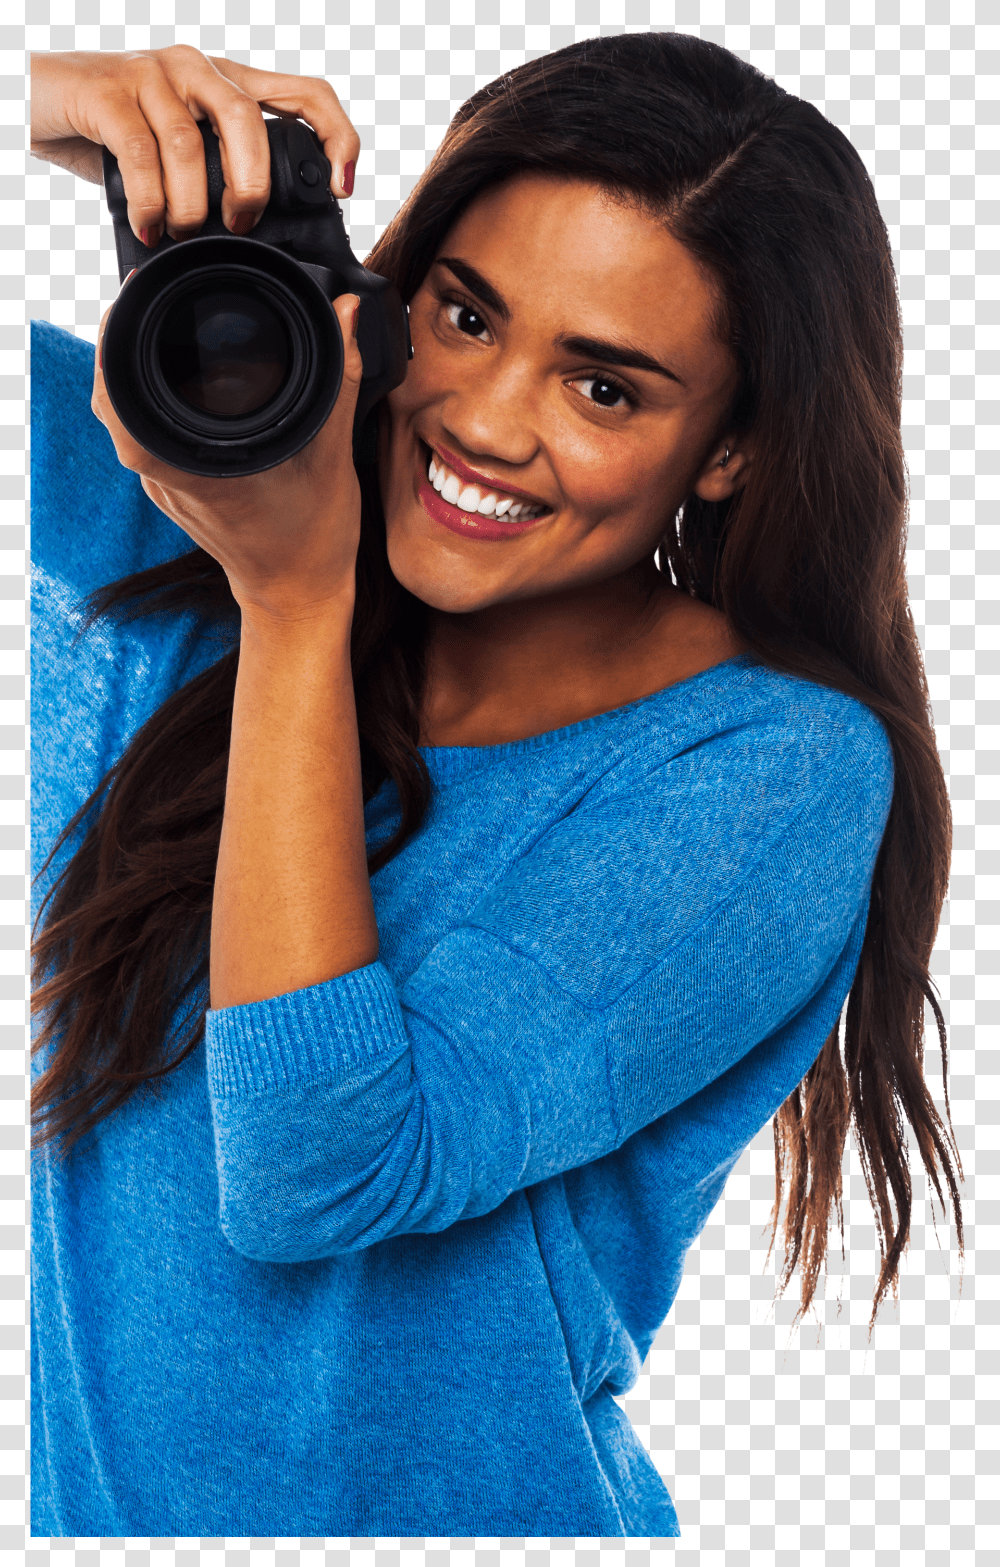 Photographer Free Commercial Use Image Camera With Girl Pic Transparent Png